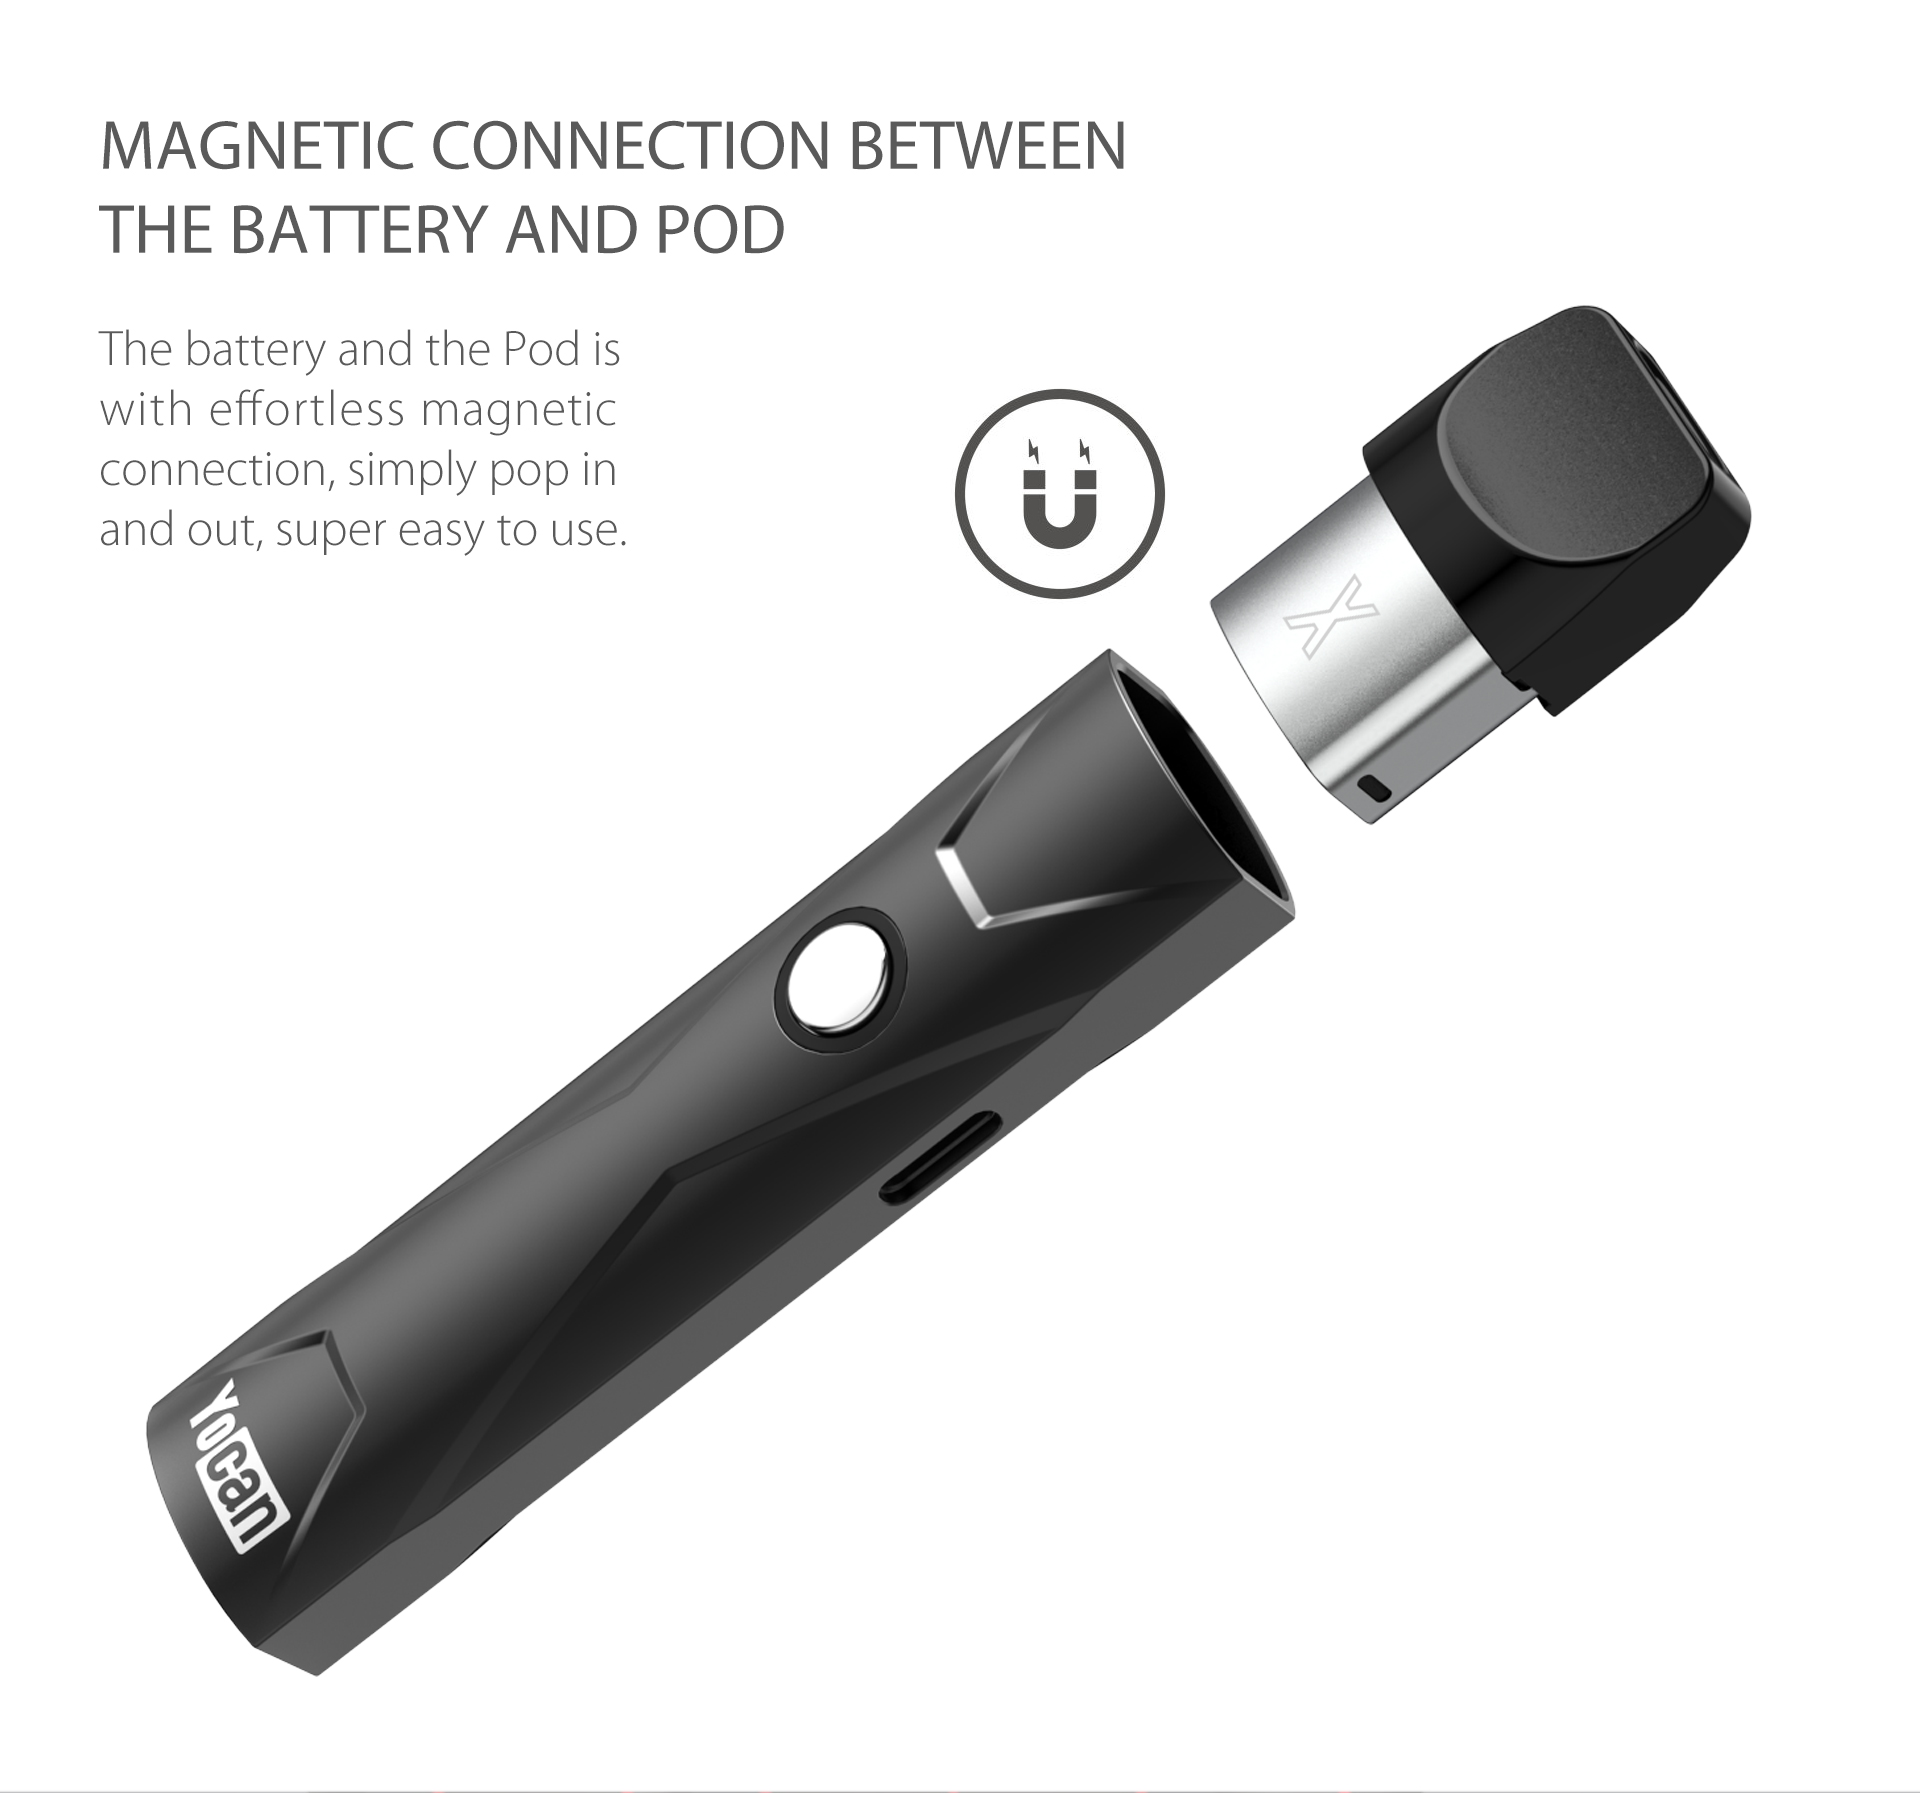 Yocan X Pod System features Magnetic Connection Between The Battery And Pod